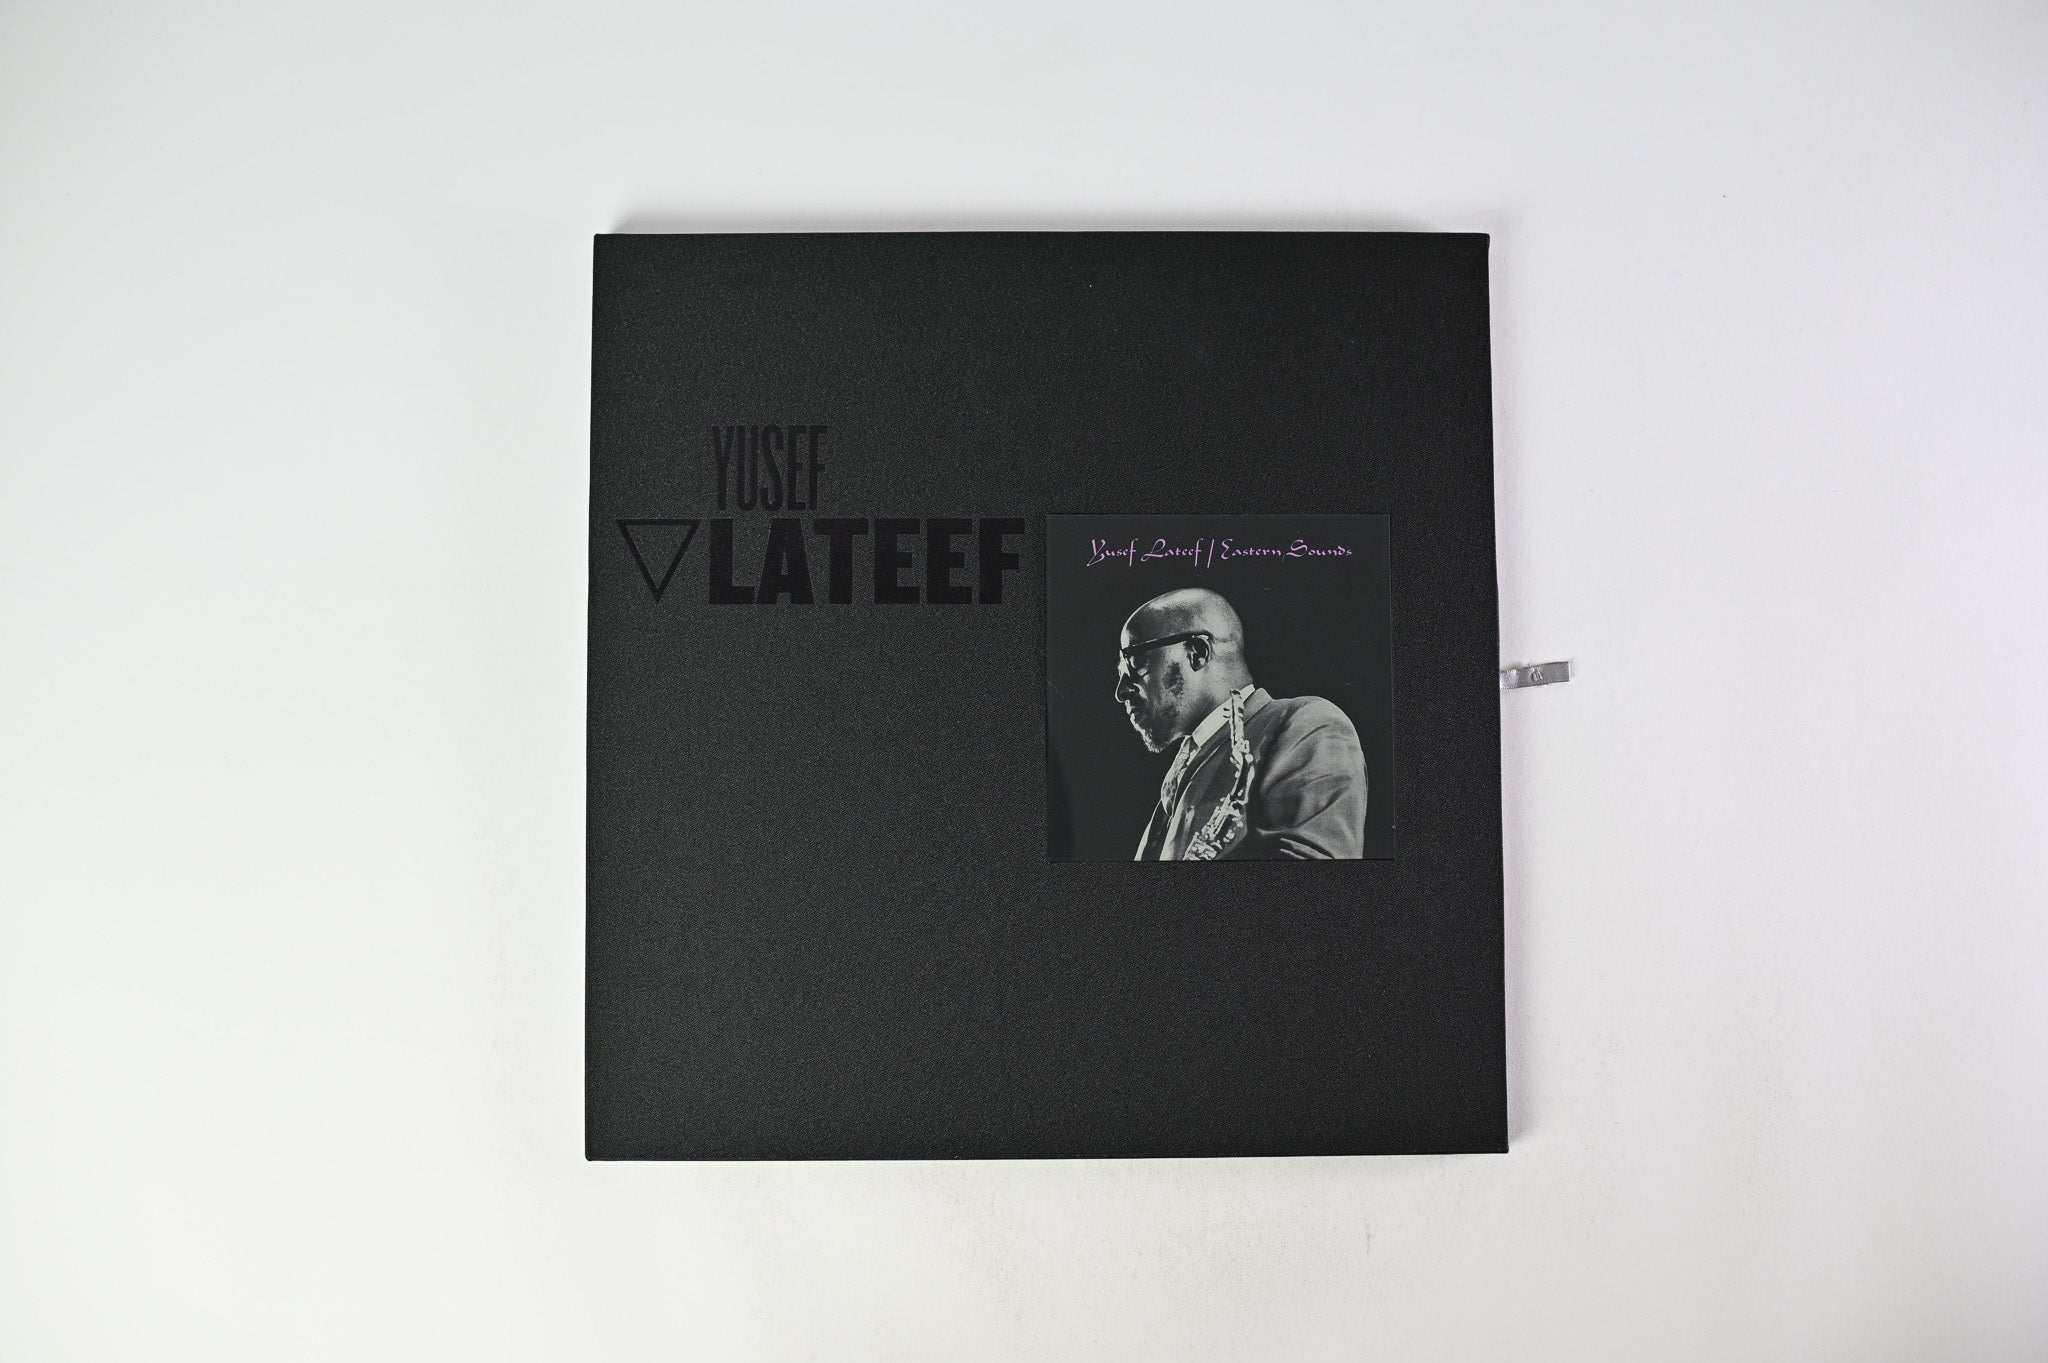 Yusef Lateef - Eastern Sounds Numbered Reissue on Craft Recordings/Moodsville